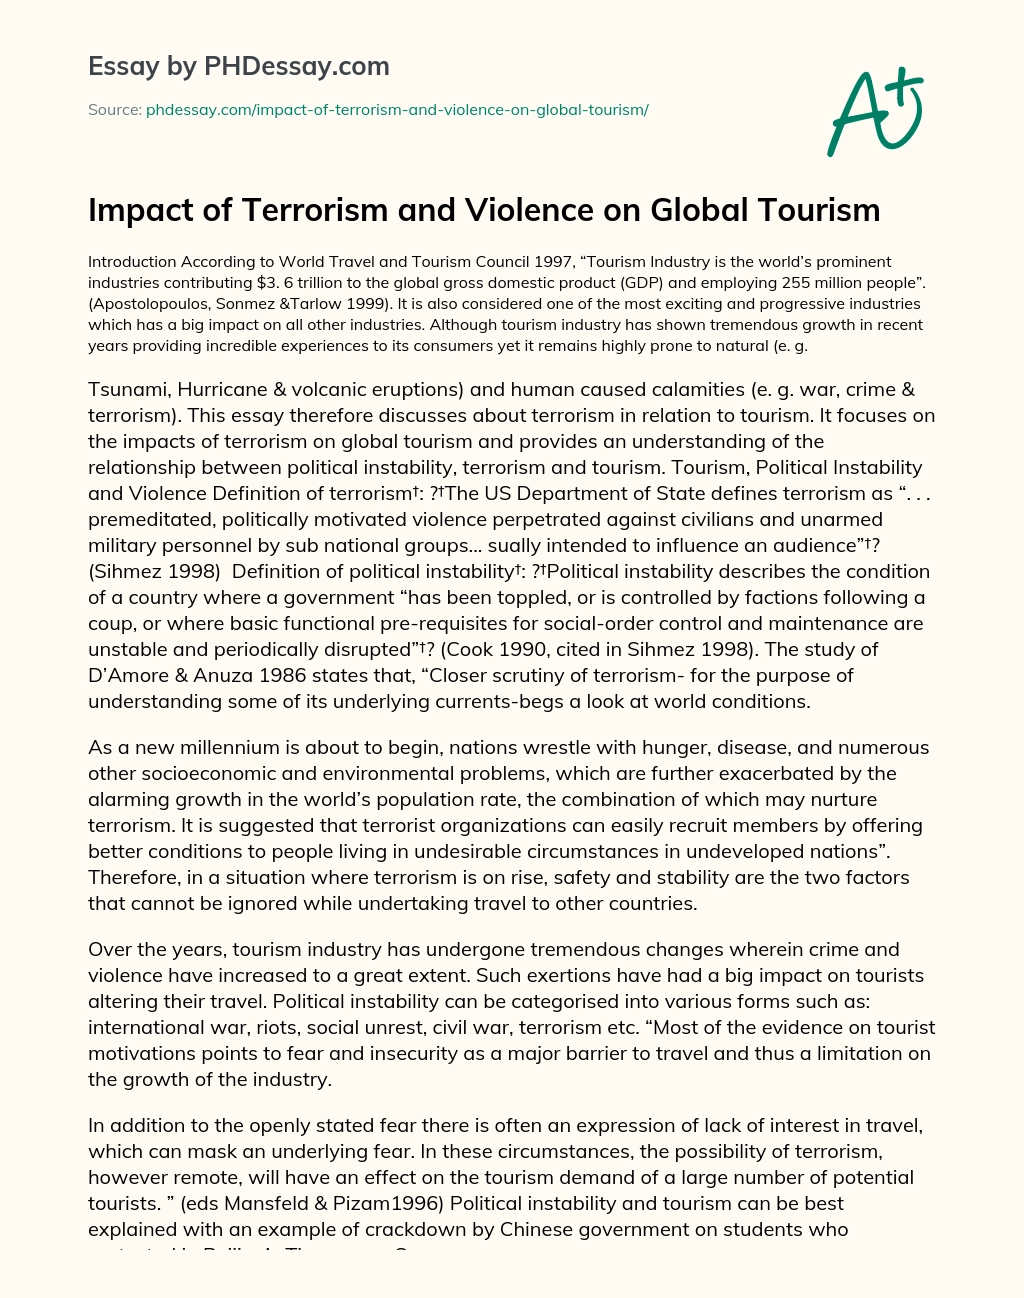 Impact of Terrorism and Violence on Global Tourism essay